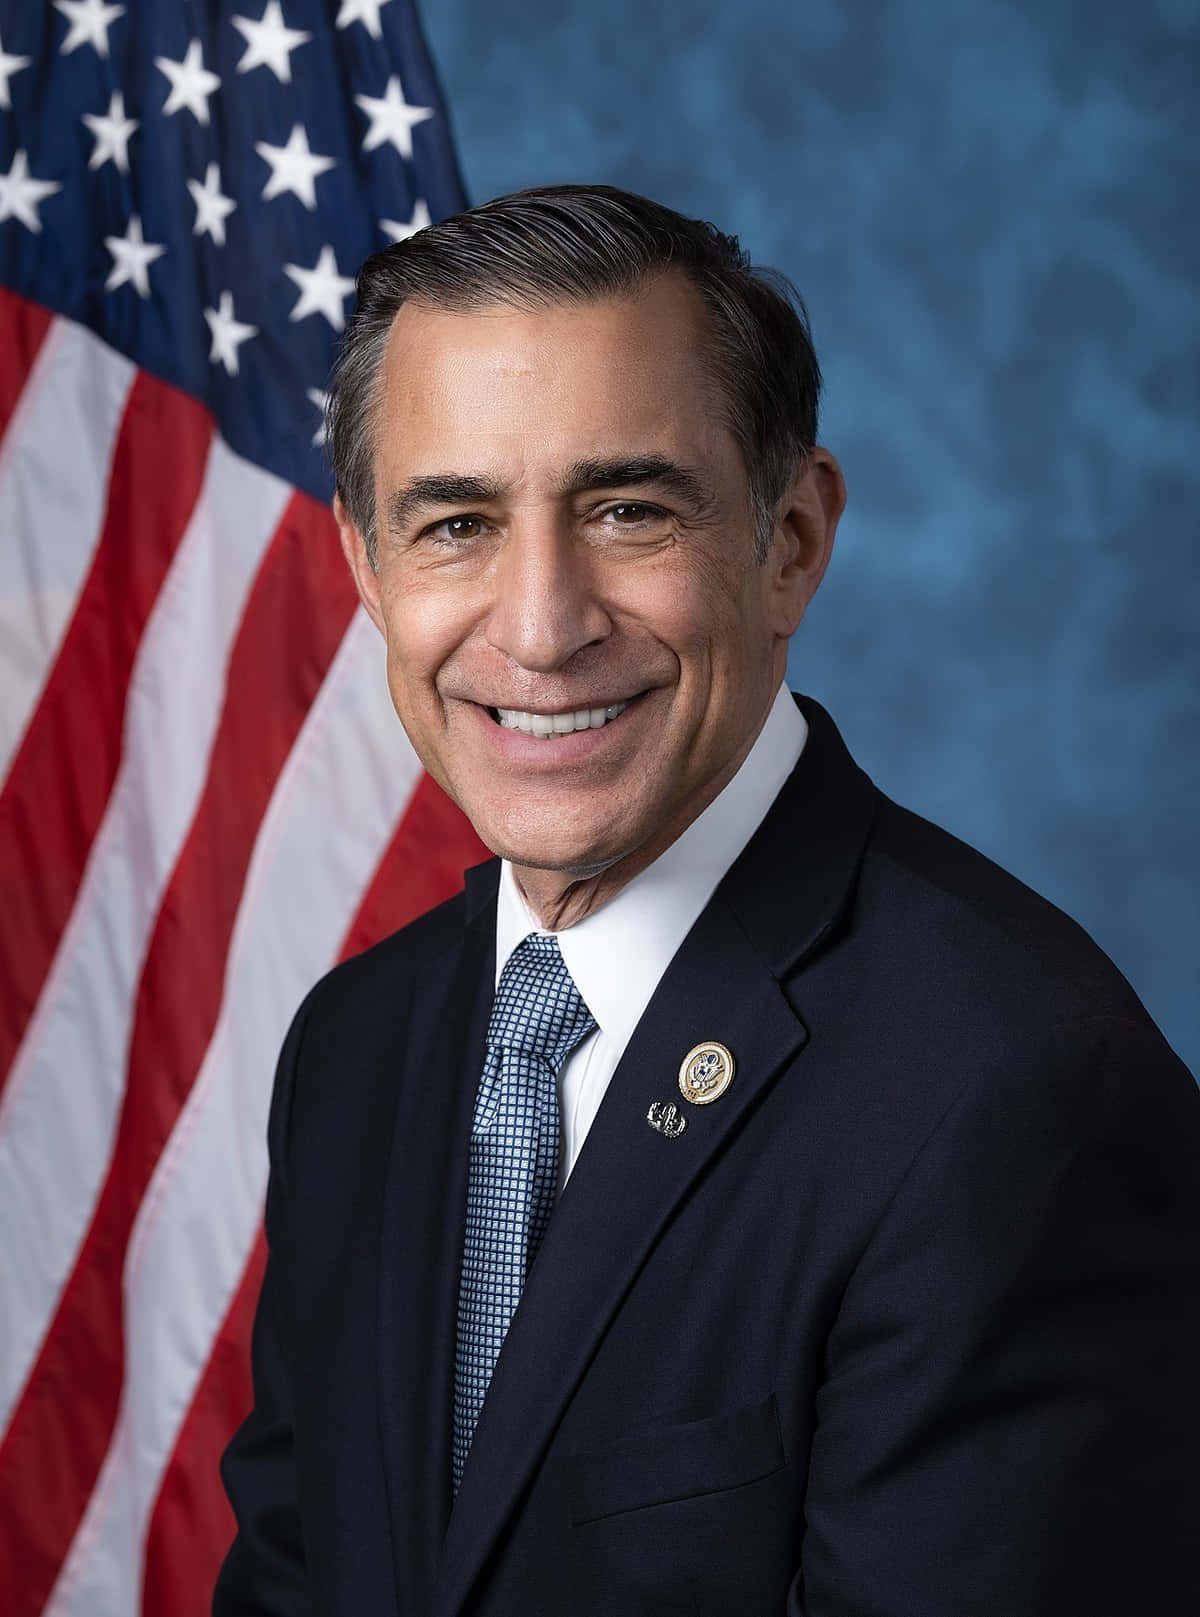 Darrell Issa Blue Backdrop With Flag Wallpaper